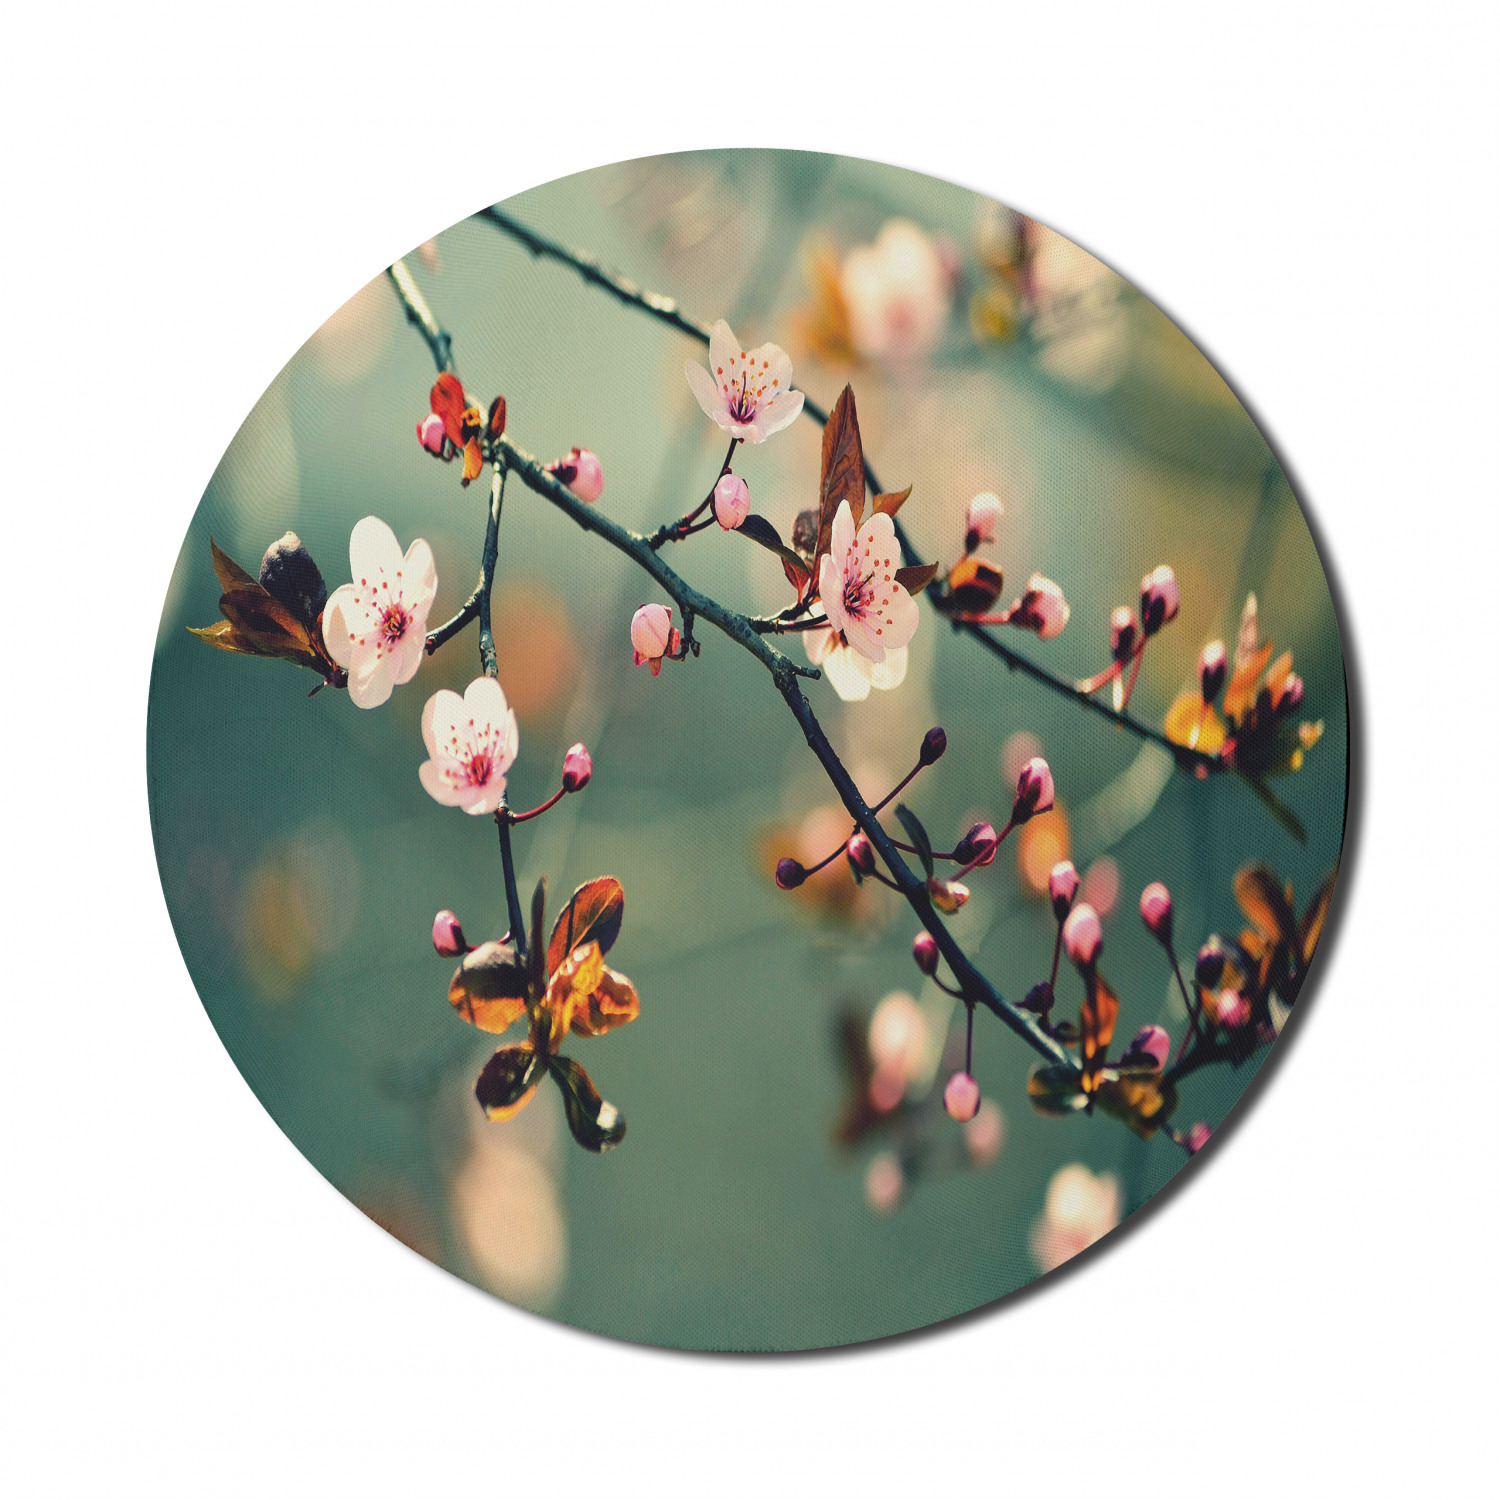 Nature Mouse Pad for Computers, Spring Themed Floral Flowering Japanese Cherry Sakura Photo, Round Non-Slip Thick Rubber Modern Gaming Mousepad, 8" Round, Forest Green Pale Pink, by Ambesonne - image 1 of 2